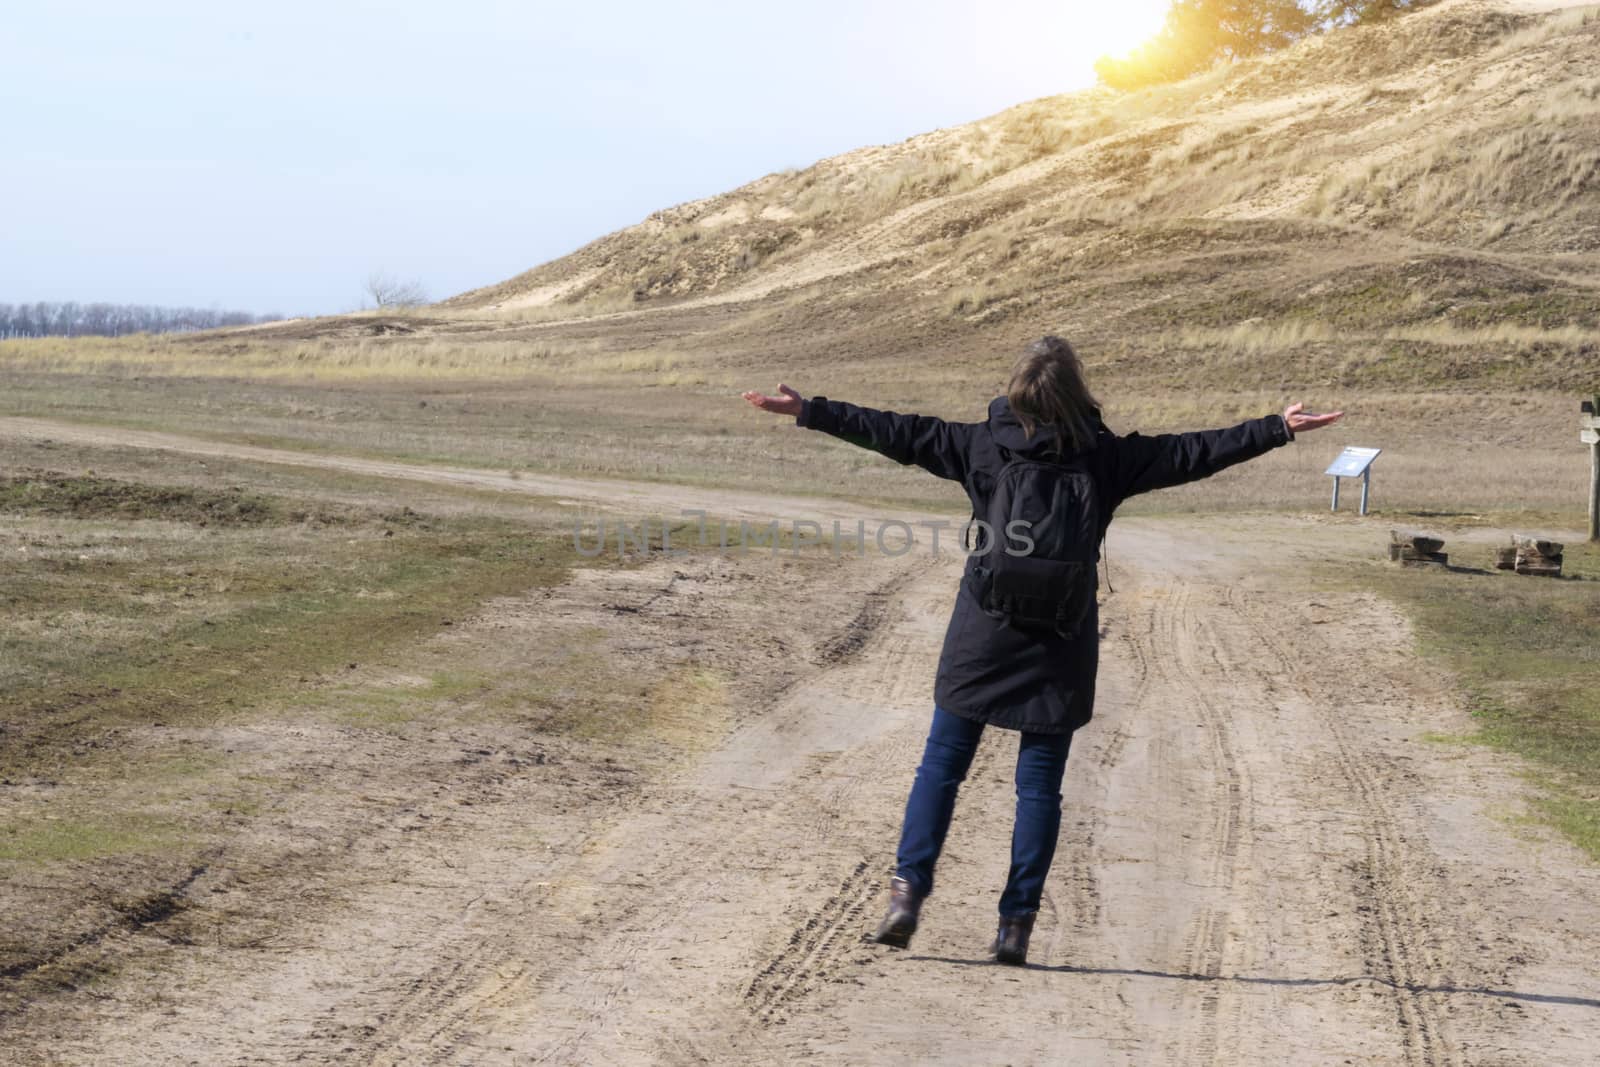 Caucasian woman in black coat arms raised on empty road towards sunset by Fr@nk